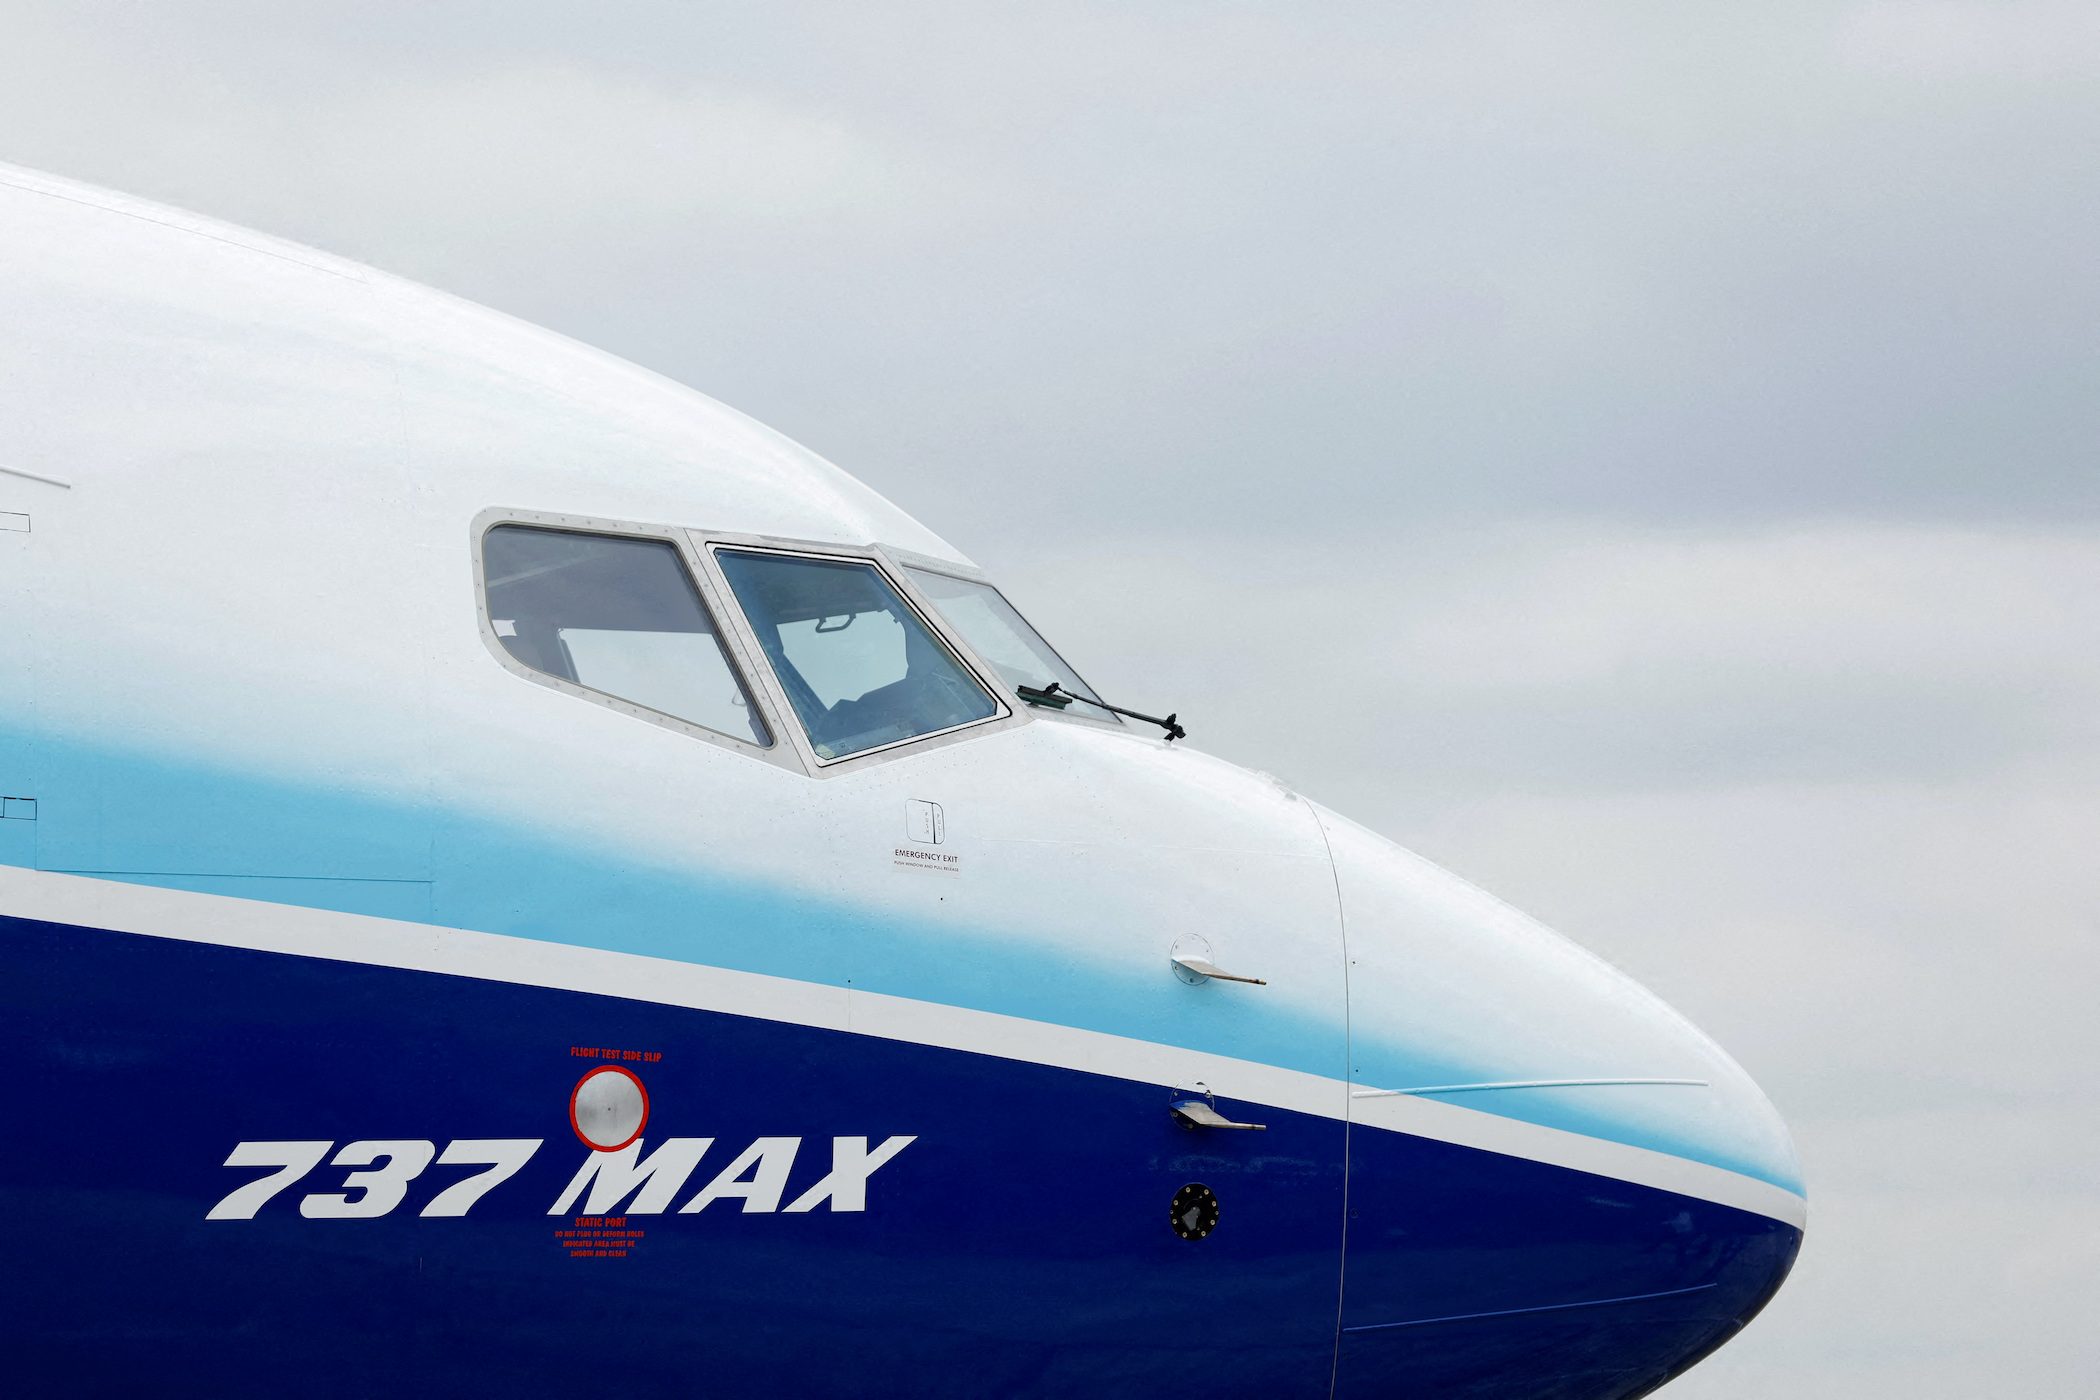 US judge rules passengers in fatal Boeing 737 MAX crashes are ‘crime victims’